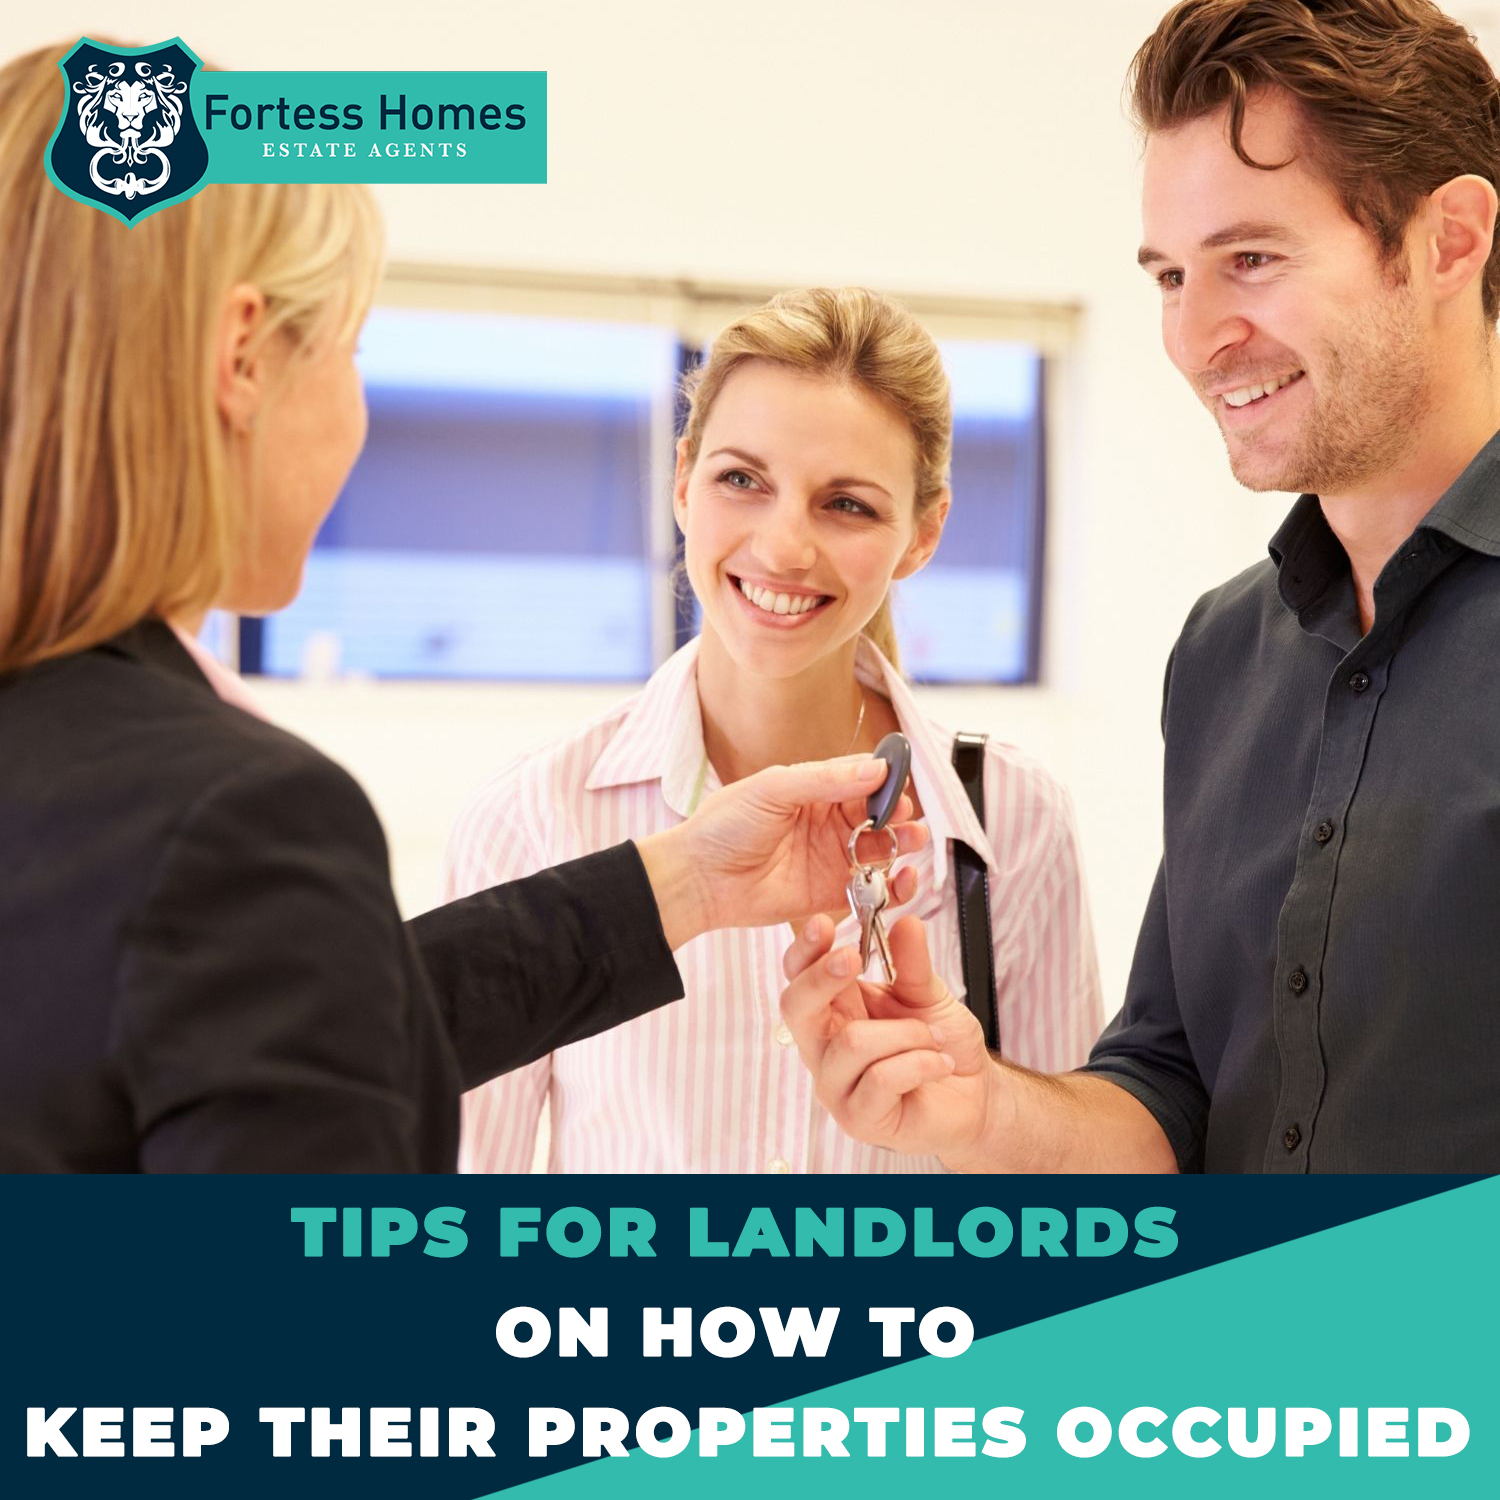 TIPS FOR LANDLORDS ON HOW TO KEEP THEIR PROPERTIES OCCUPIED